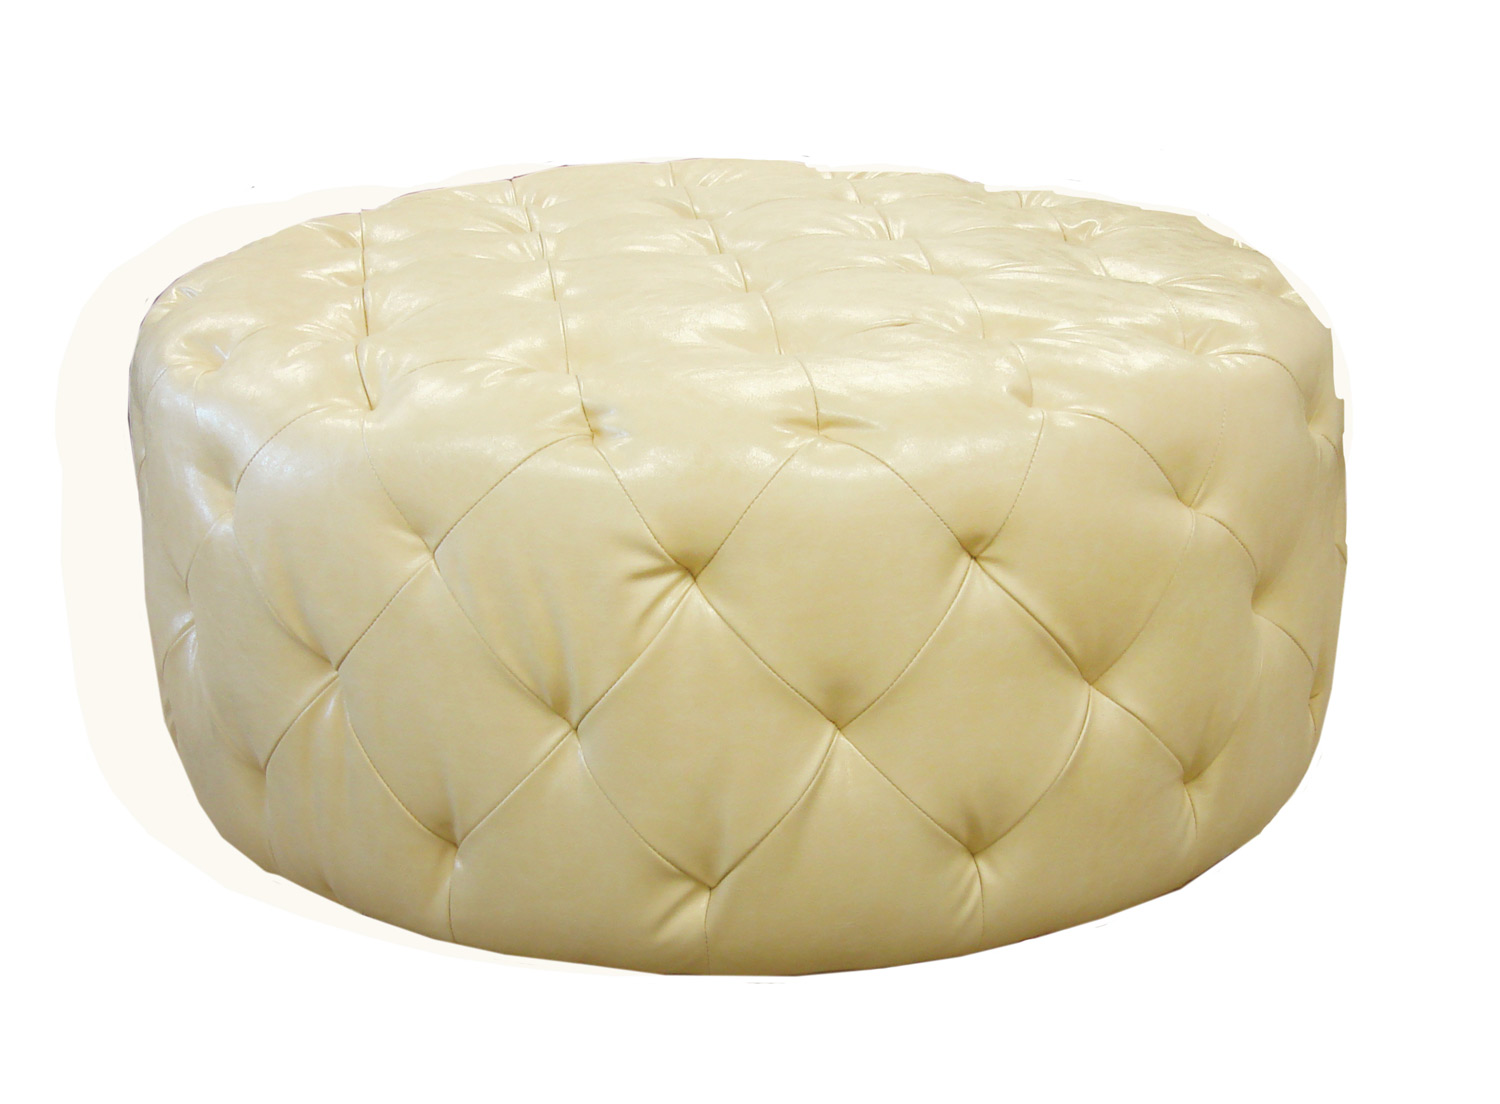 Armen Living Victoria Ottoman - Ivory Bonded Leather